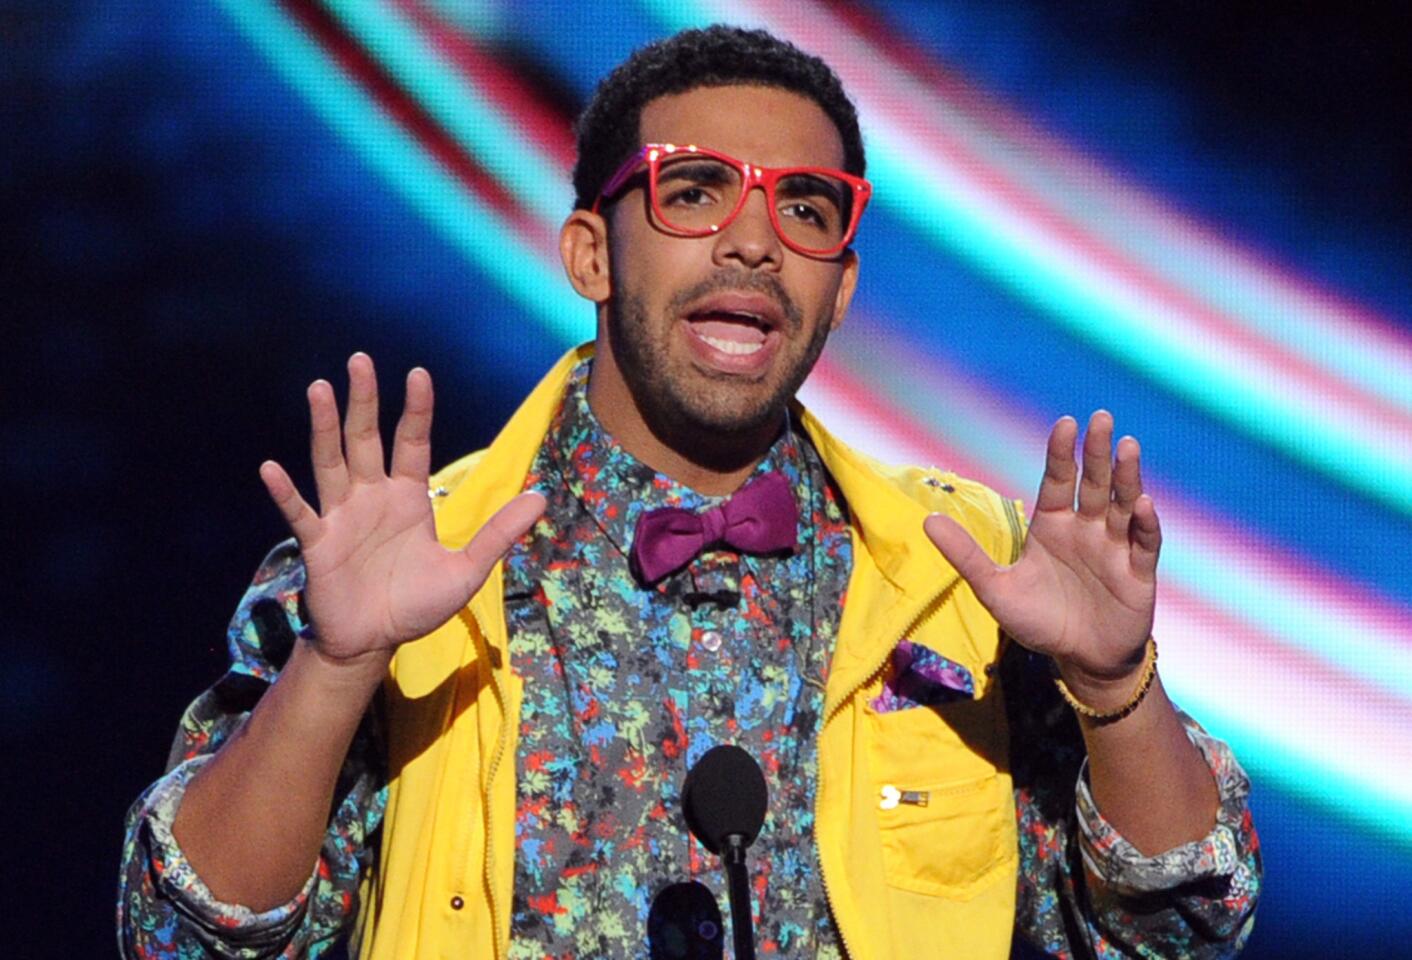 Drake hosts the ESPY Awards with success